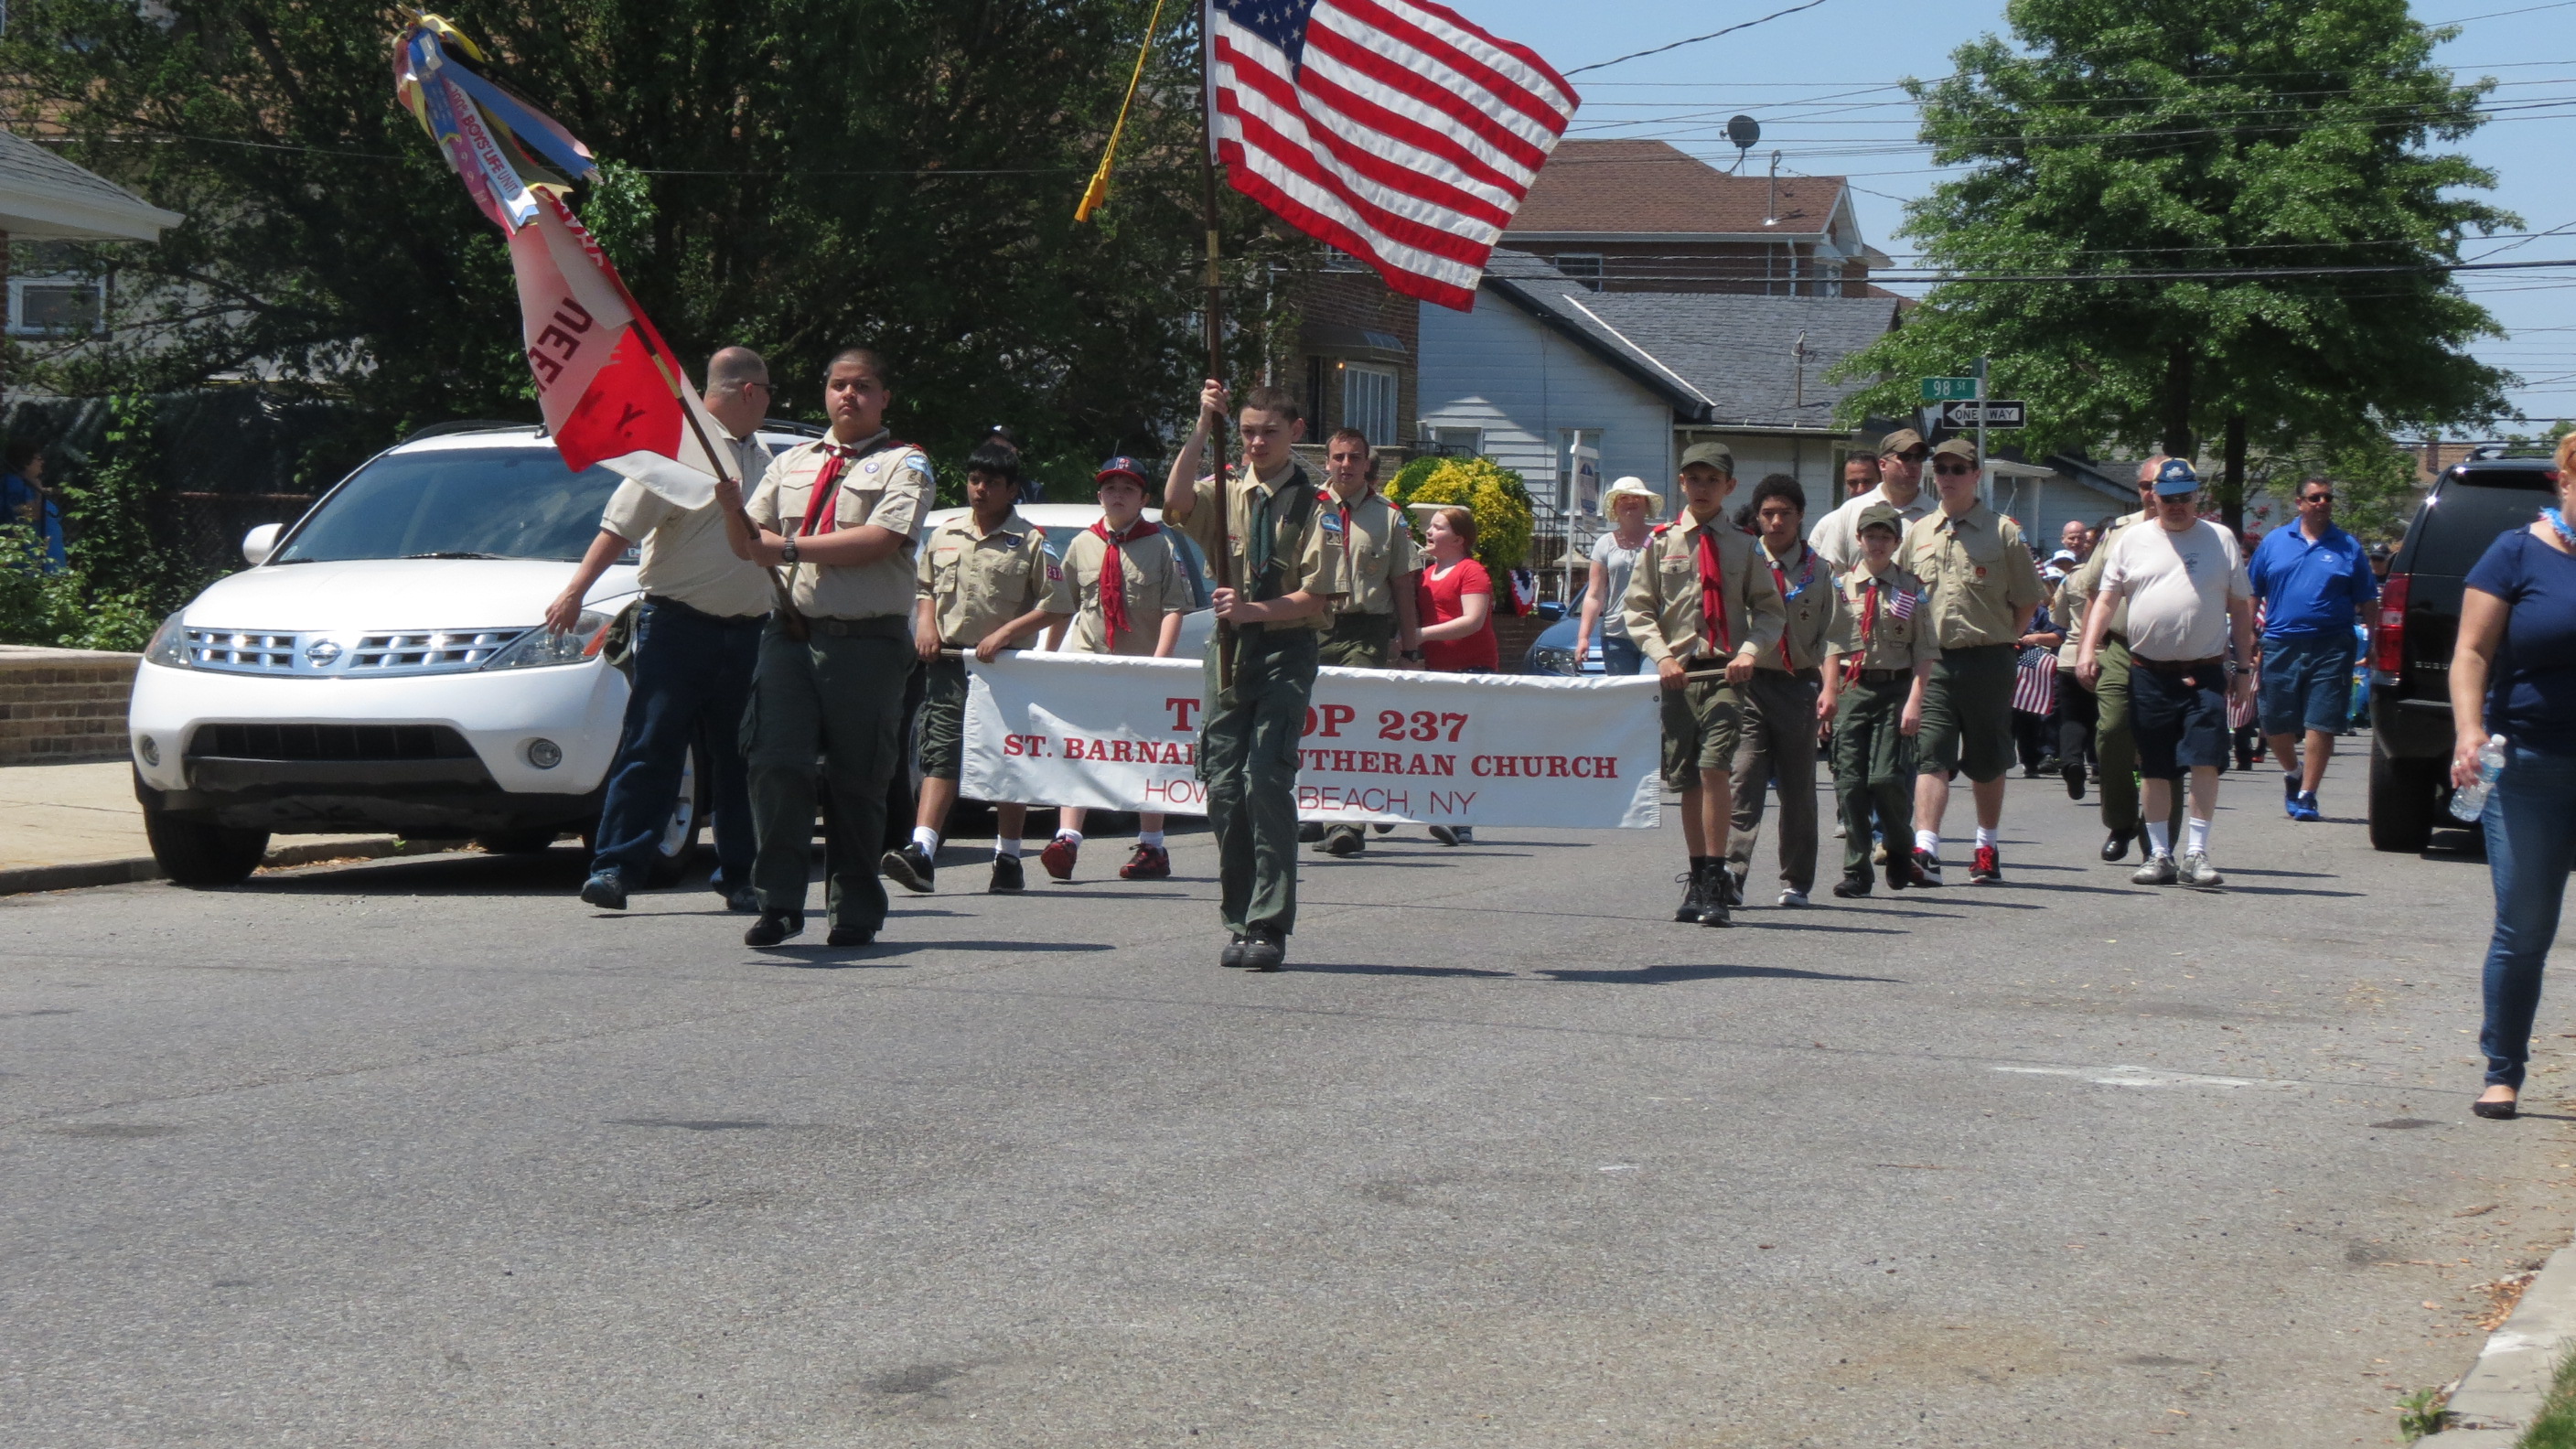 Boy Scout Troop 237 proudly marched and presented their colors on Memorial Day. Forum Photos by Patricia Adams and Michael V. Cusenza.